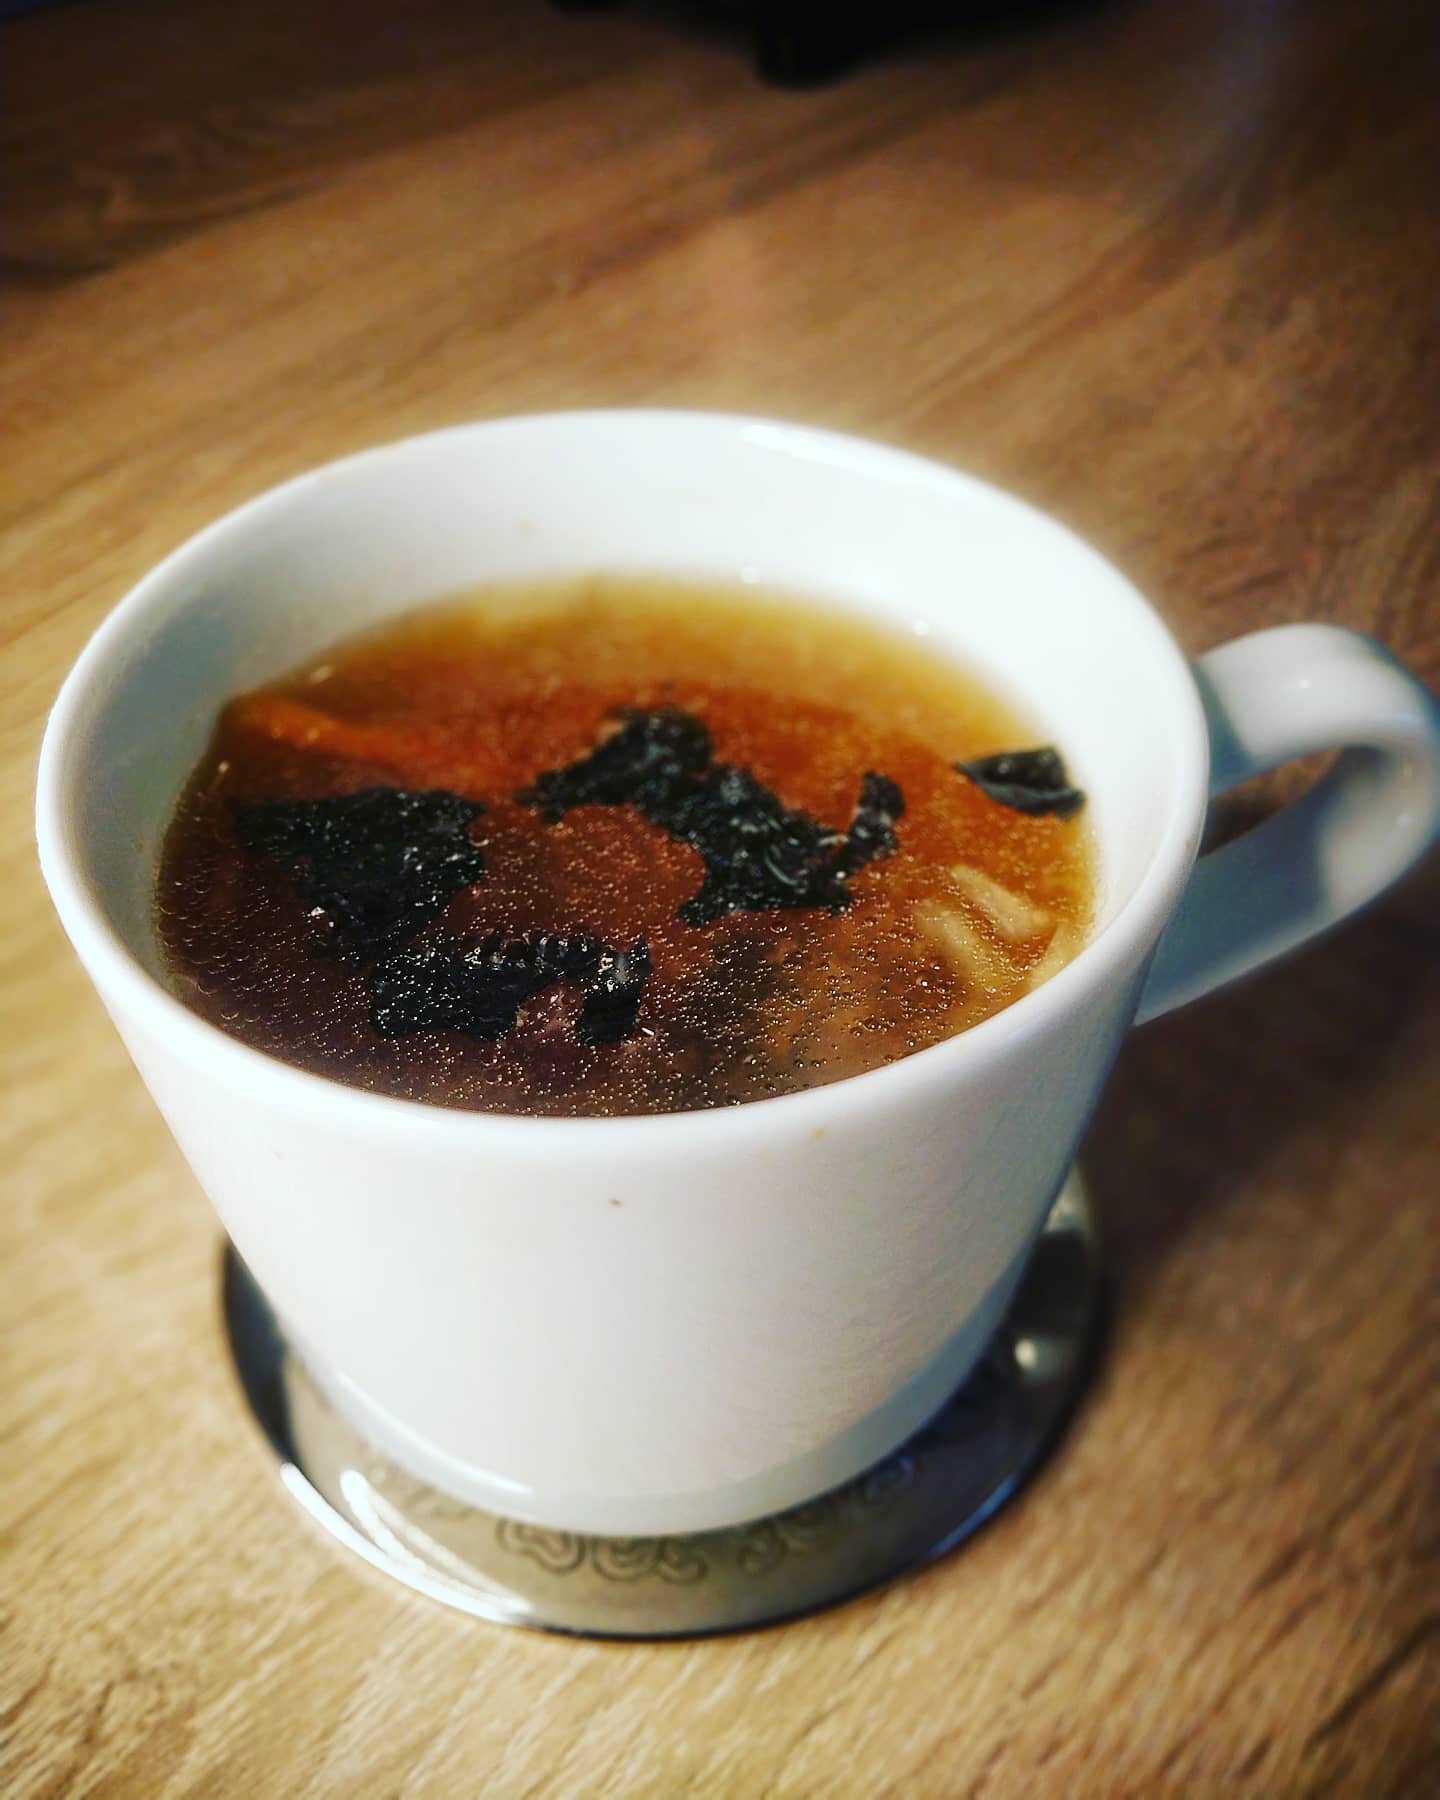 Before you rush out the door to work or school try
my 2 mins &amp; 30 second go-to warning morning miso broth in a cup, cup of boiling water, half a cube of organic mushroom stock, pinch of salt, while that is coming to a boil, chop half a small carr